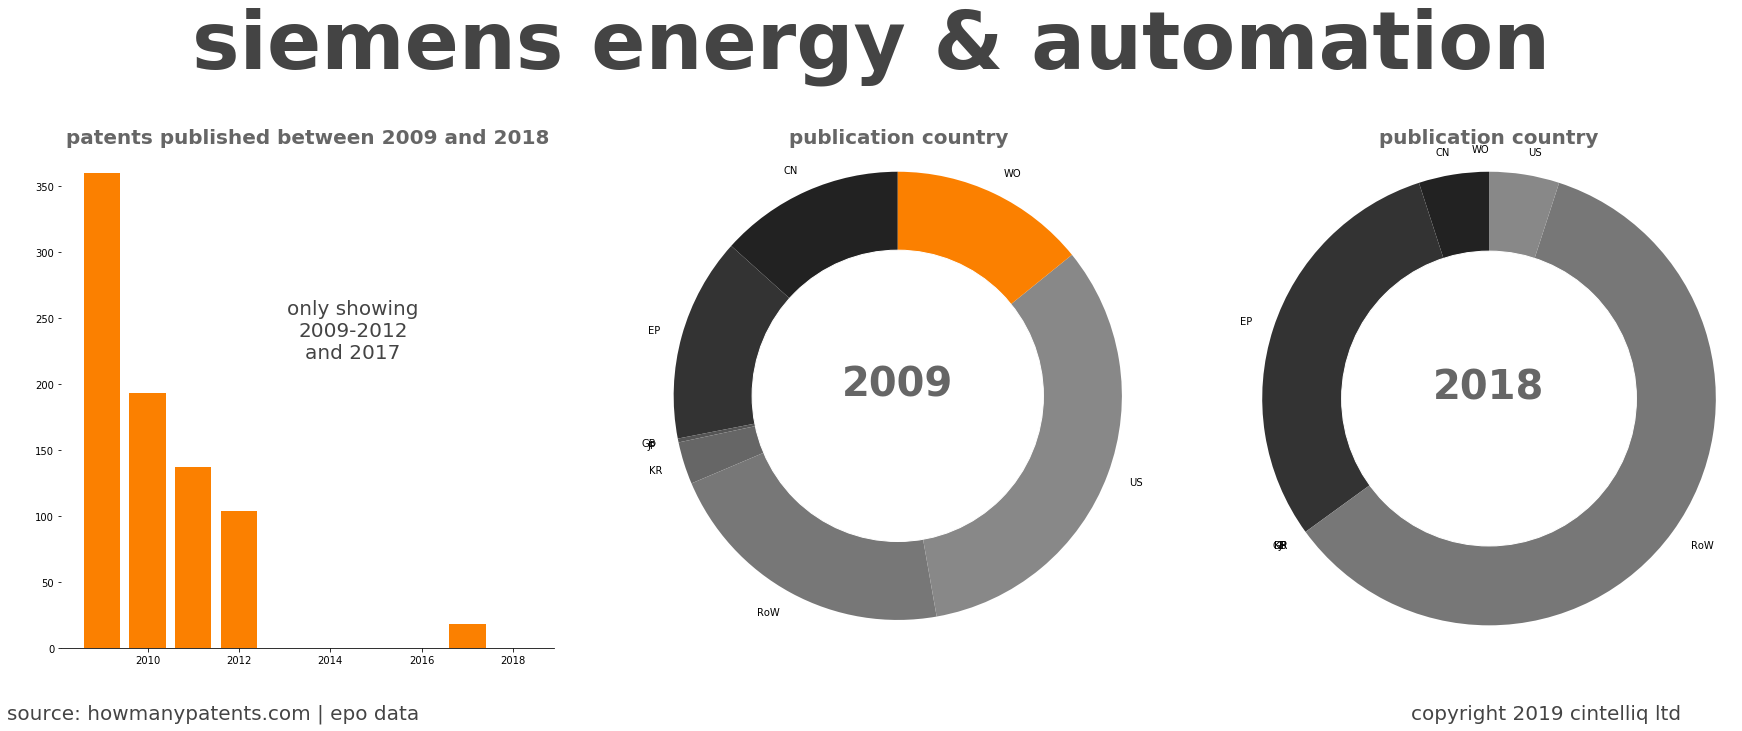 summary of patents for Siemens Energy & Automation